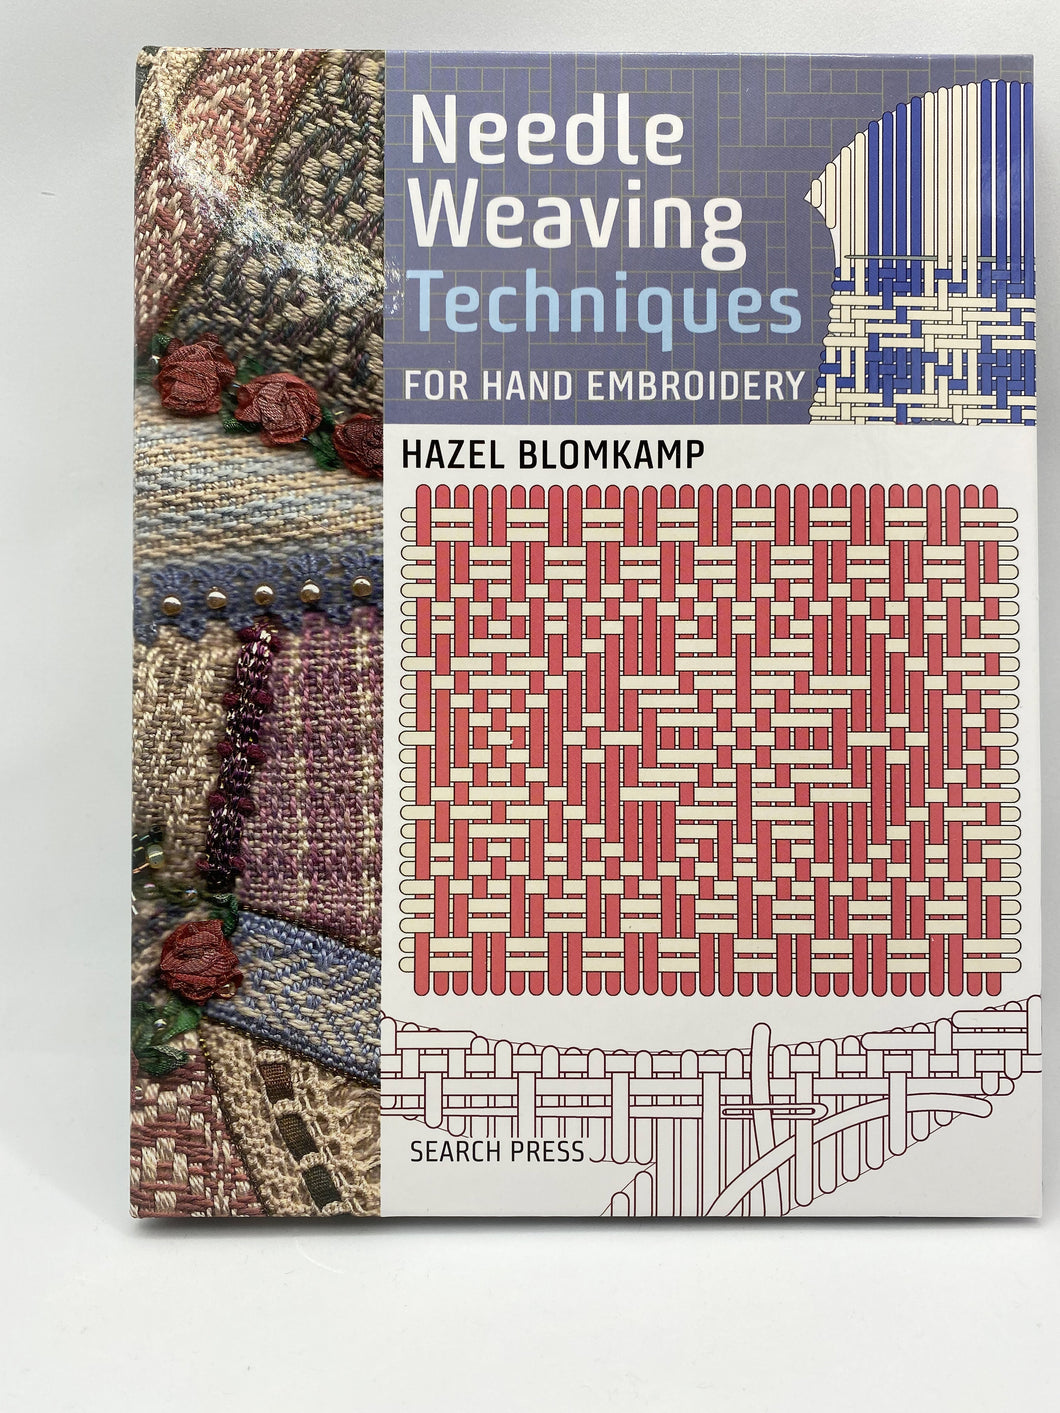 Needle Weaving Techniques for Hand Embroidery by Hazel Blomkamp